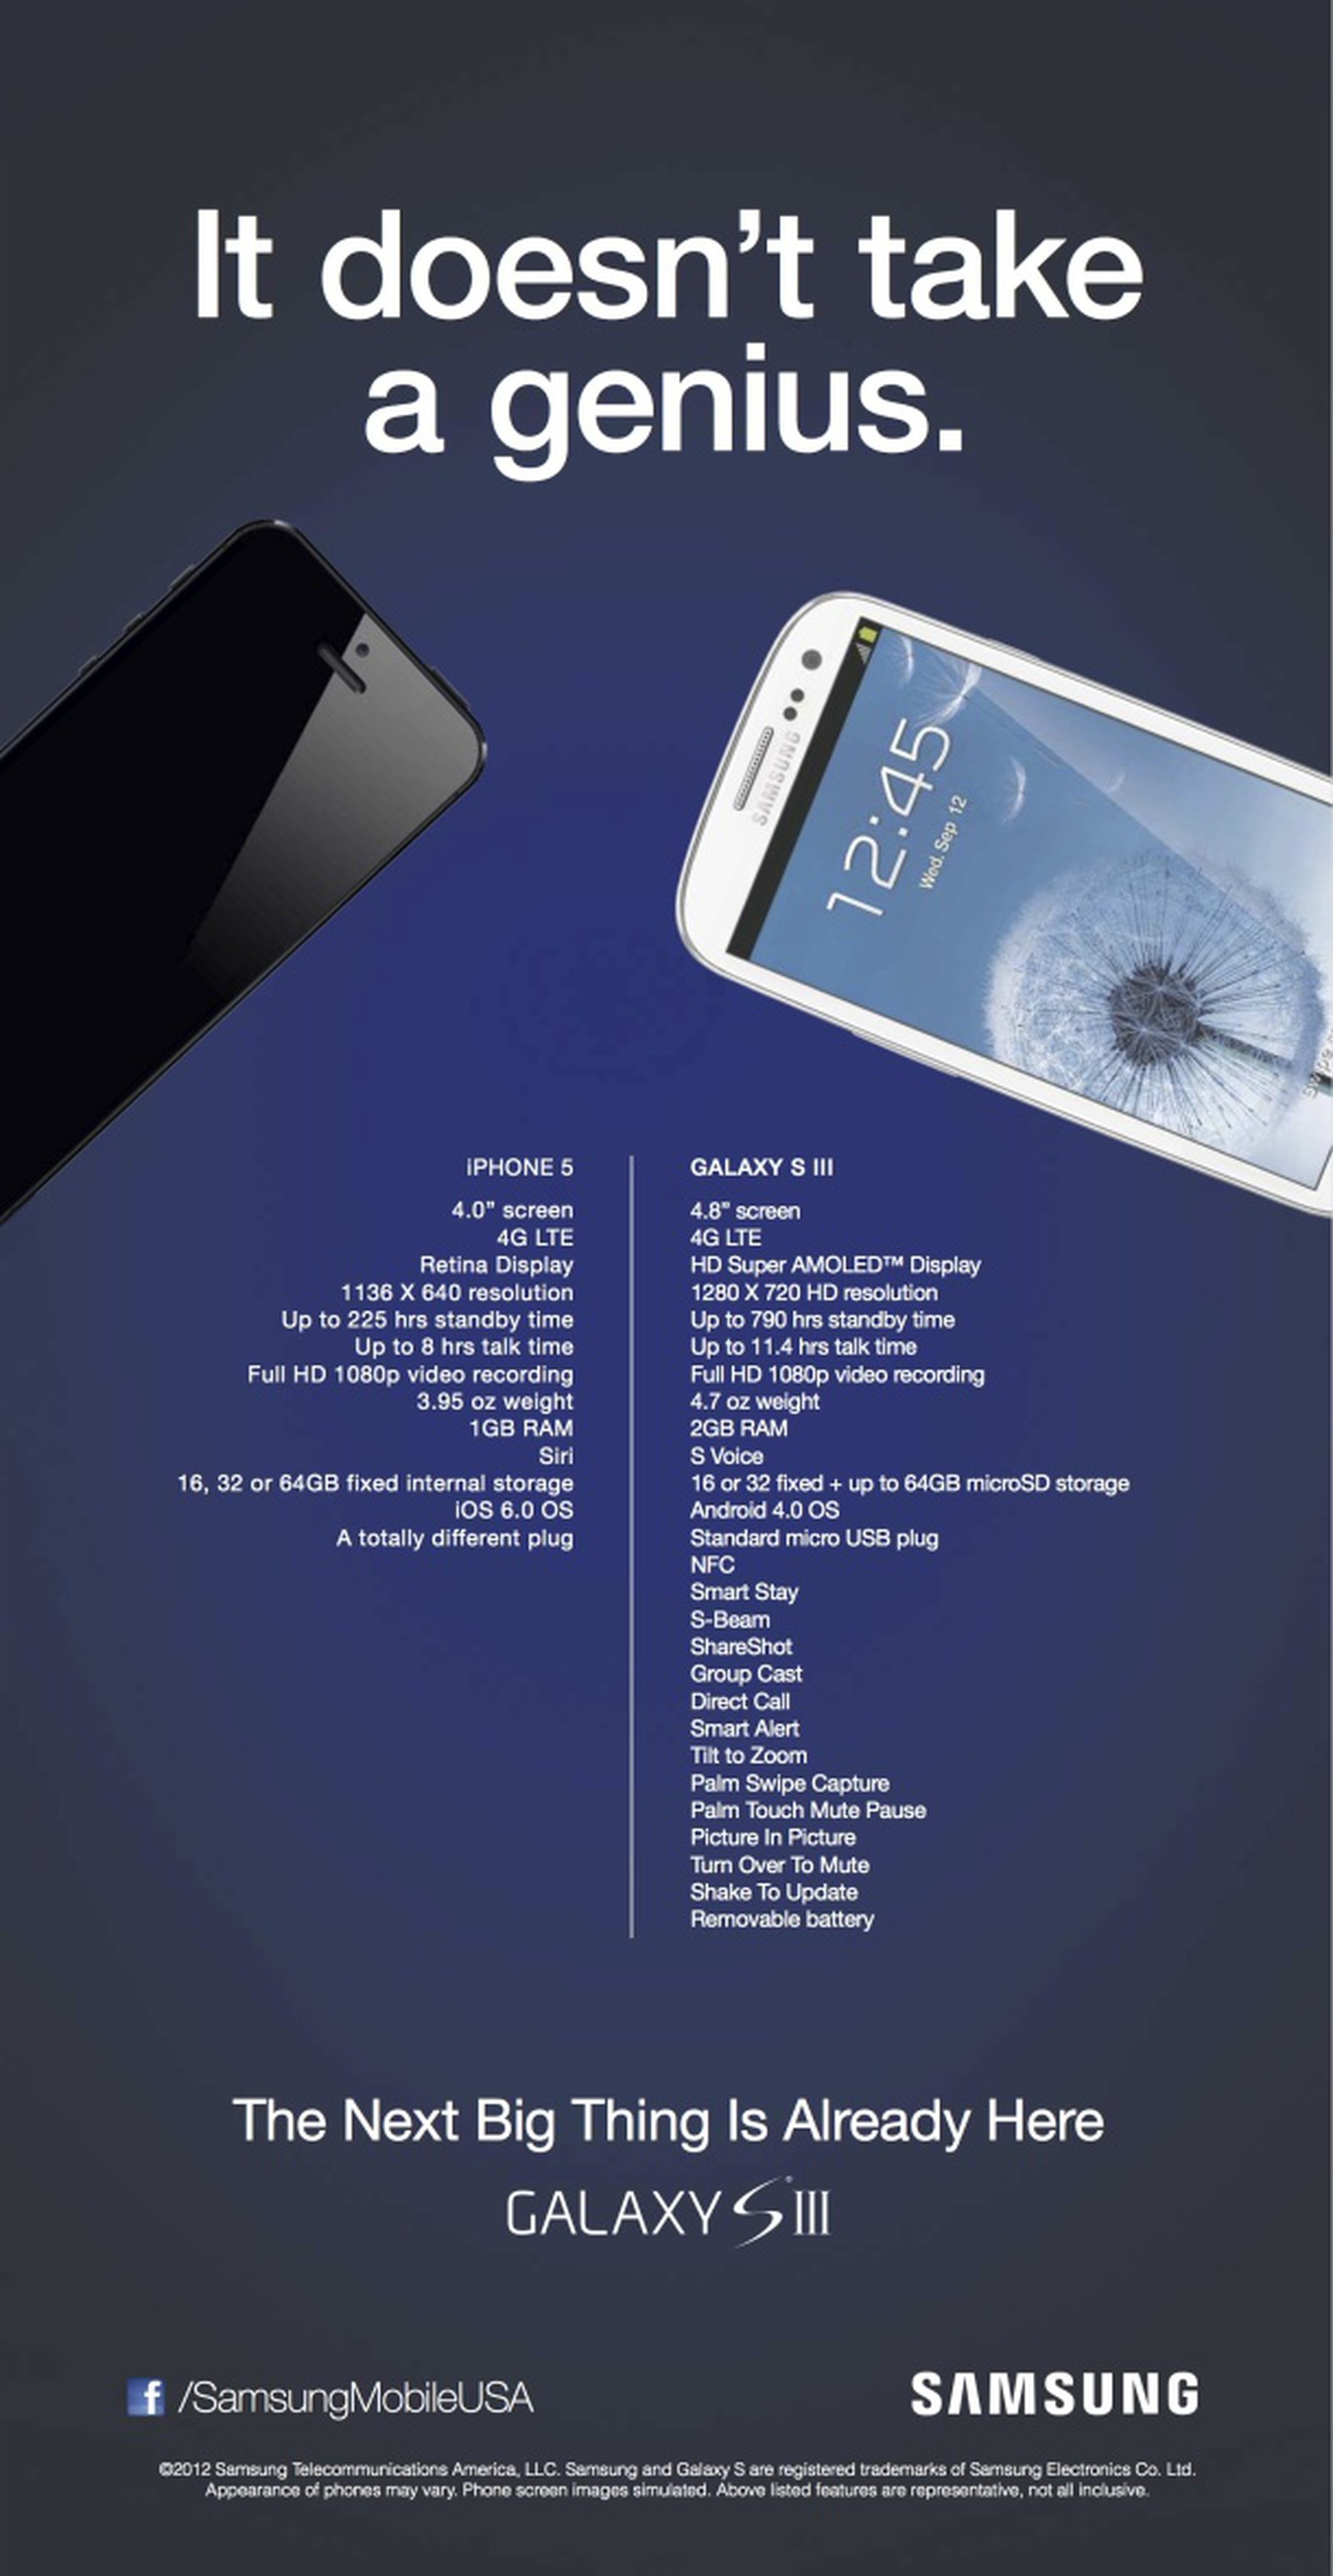 Samsung Running an iPhone 5 Attack Ad in Newspapers on Sunday MacRumors